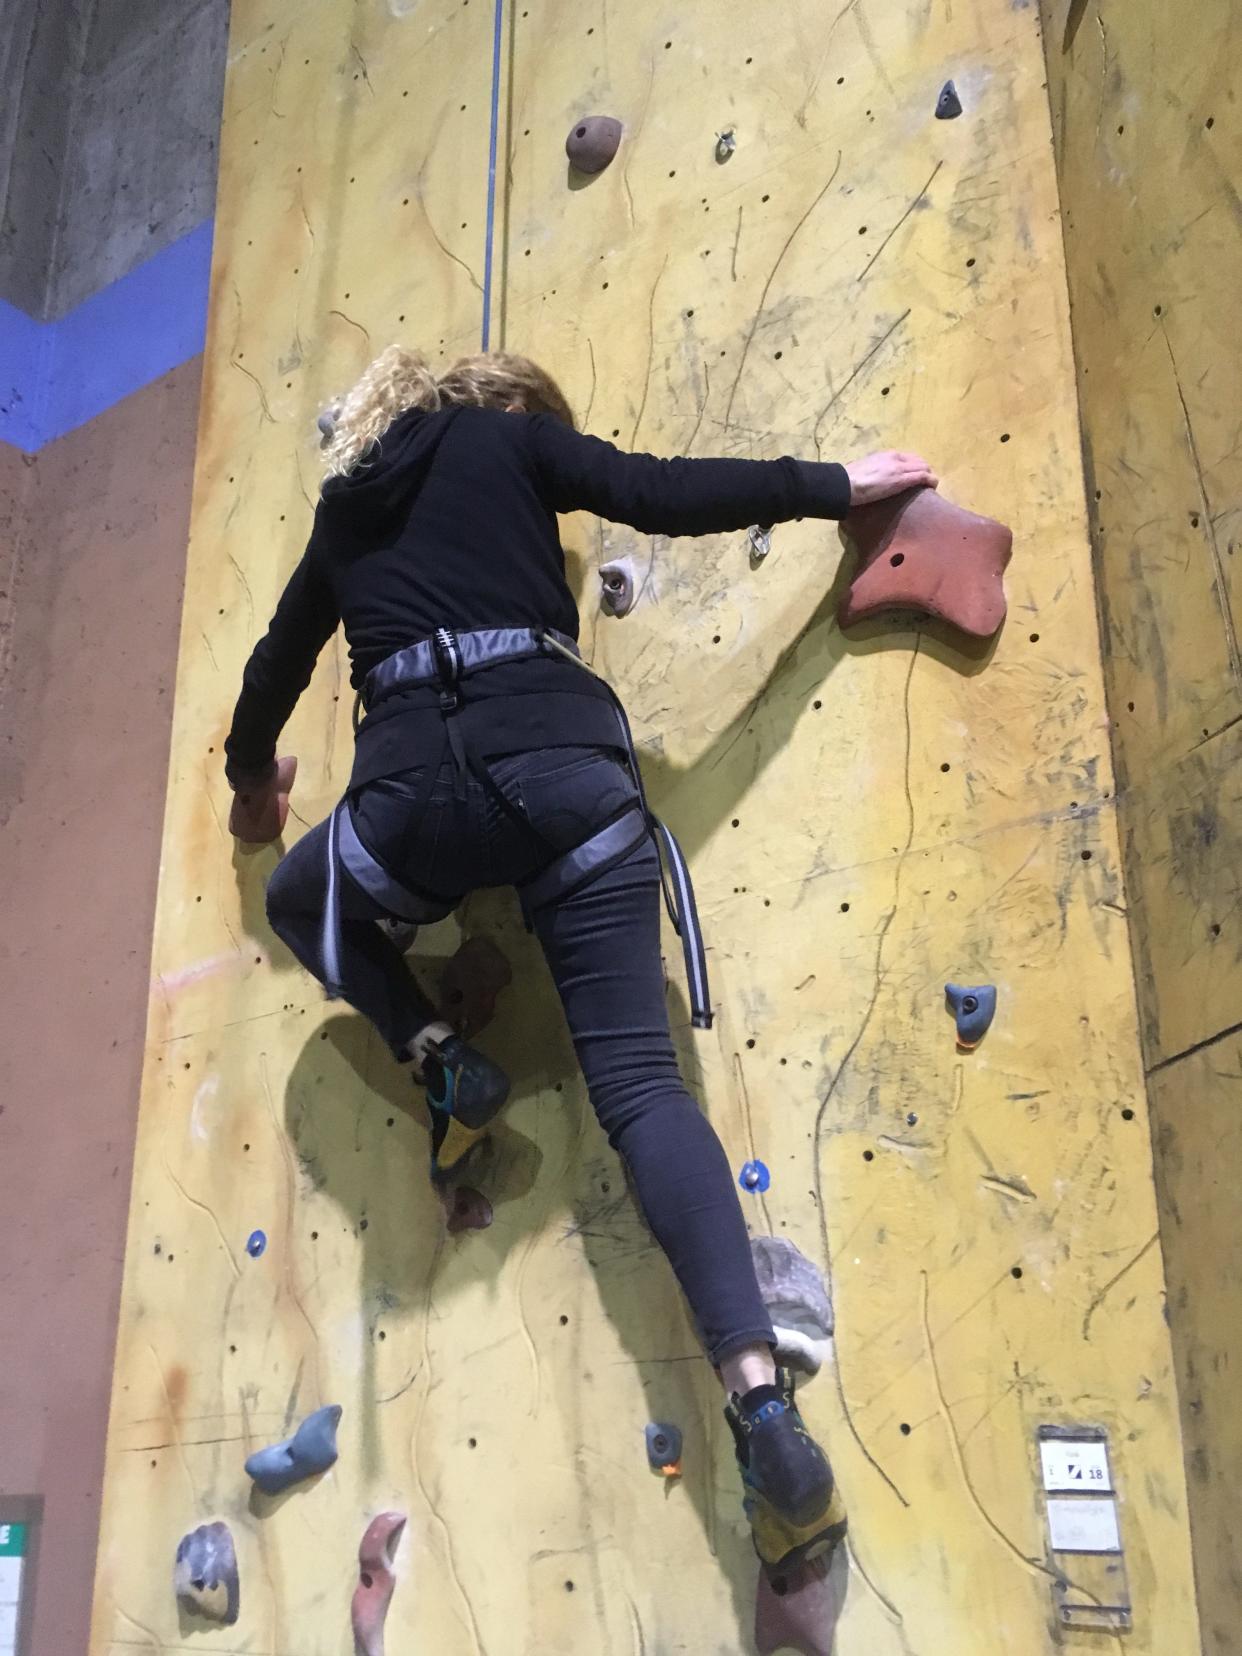 The author climbing in an indoor rock-climbing gym.